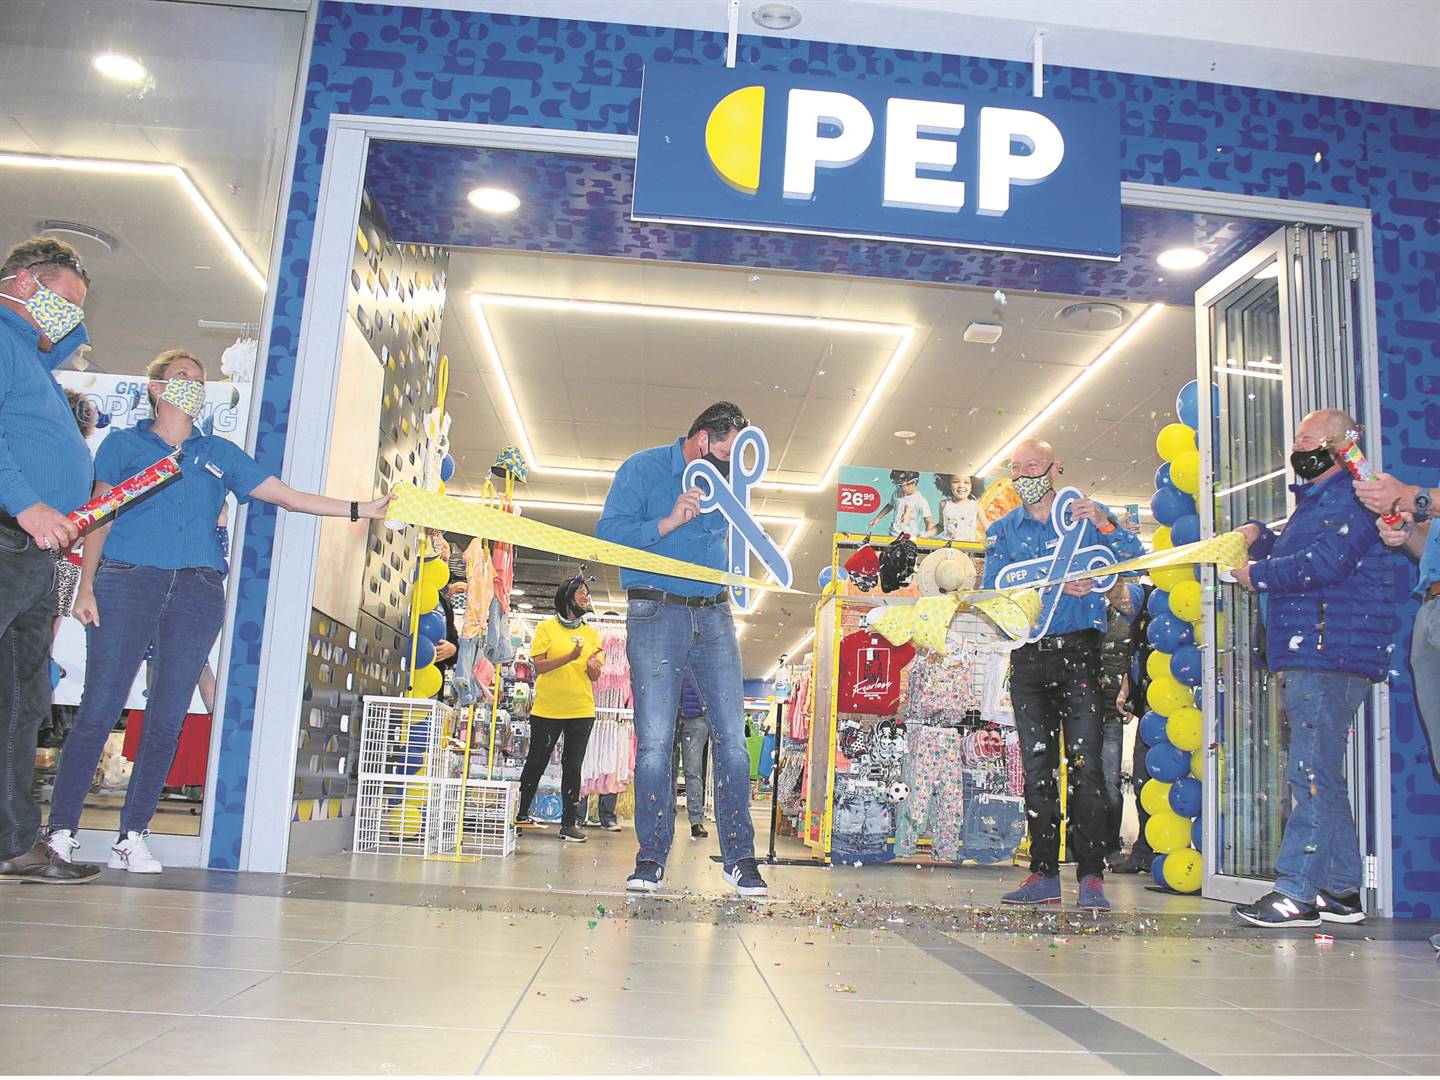 A brand new look for PEP stores | Netwerk24